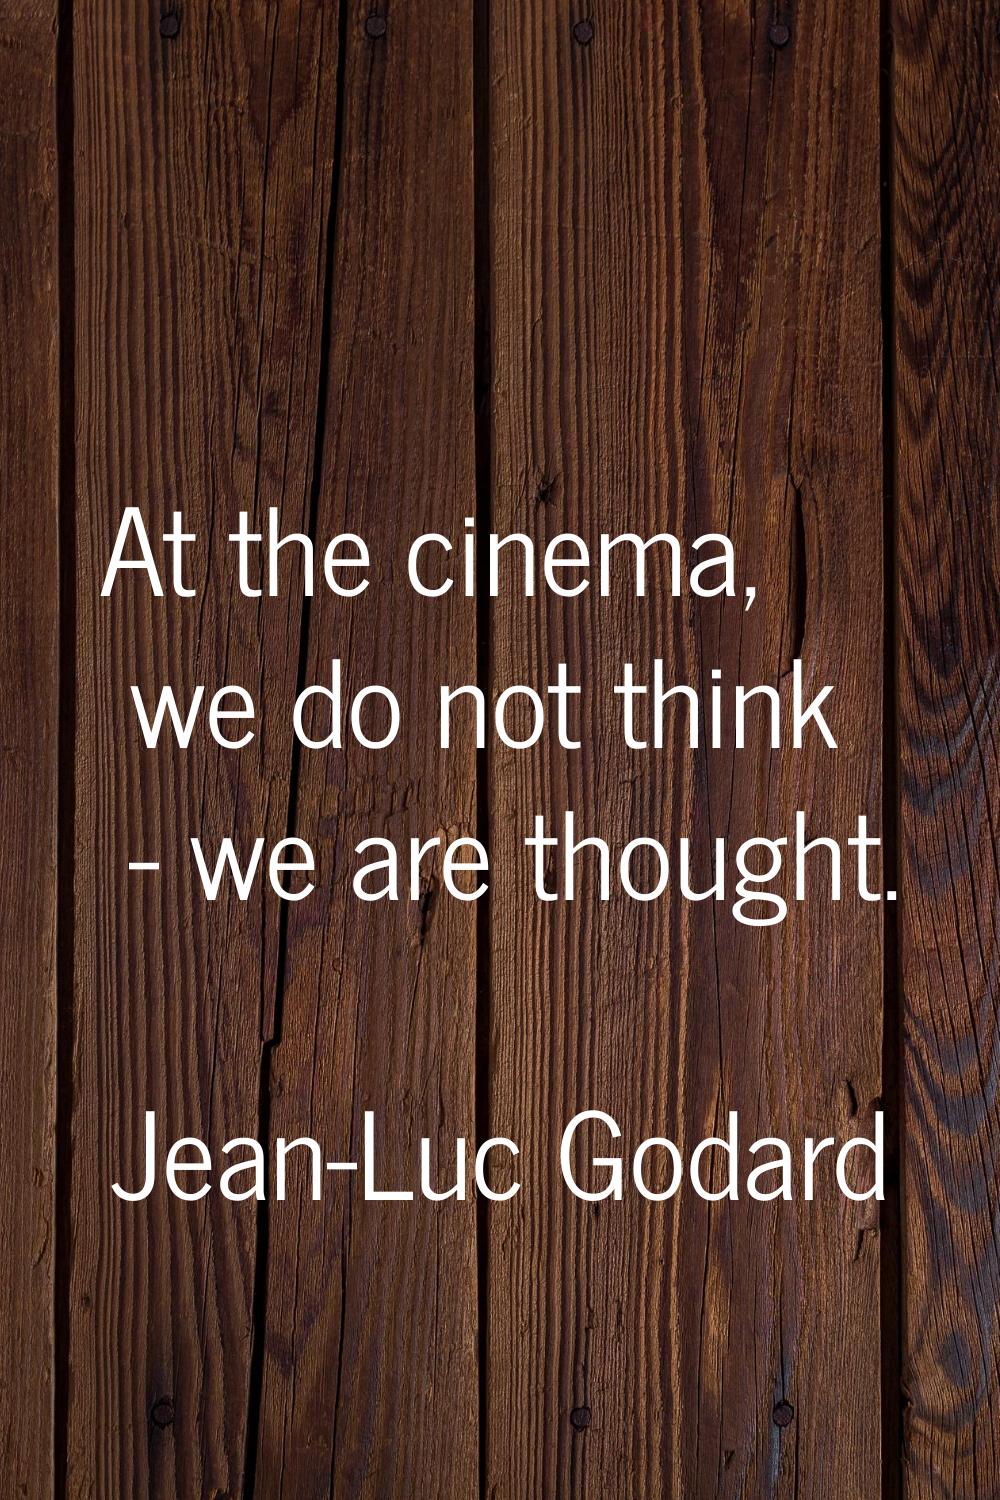 At the cinema, we do not think - we are thought.